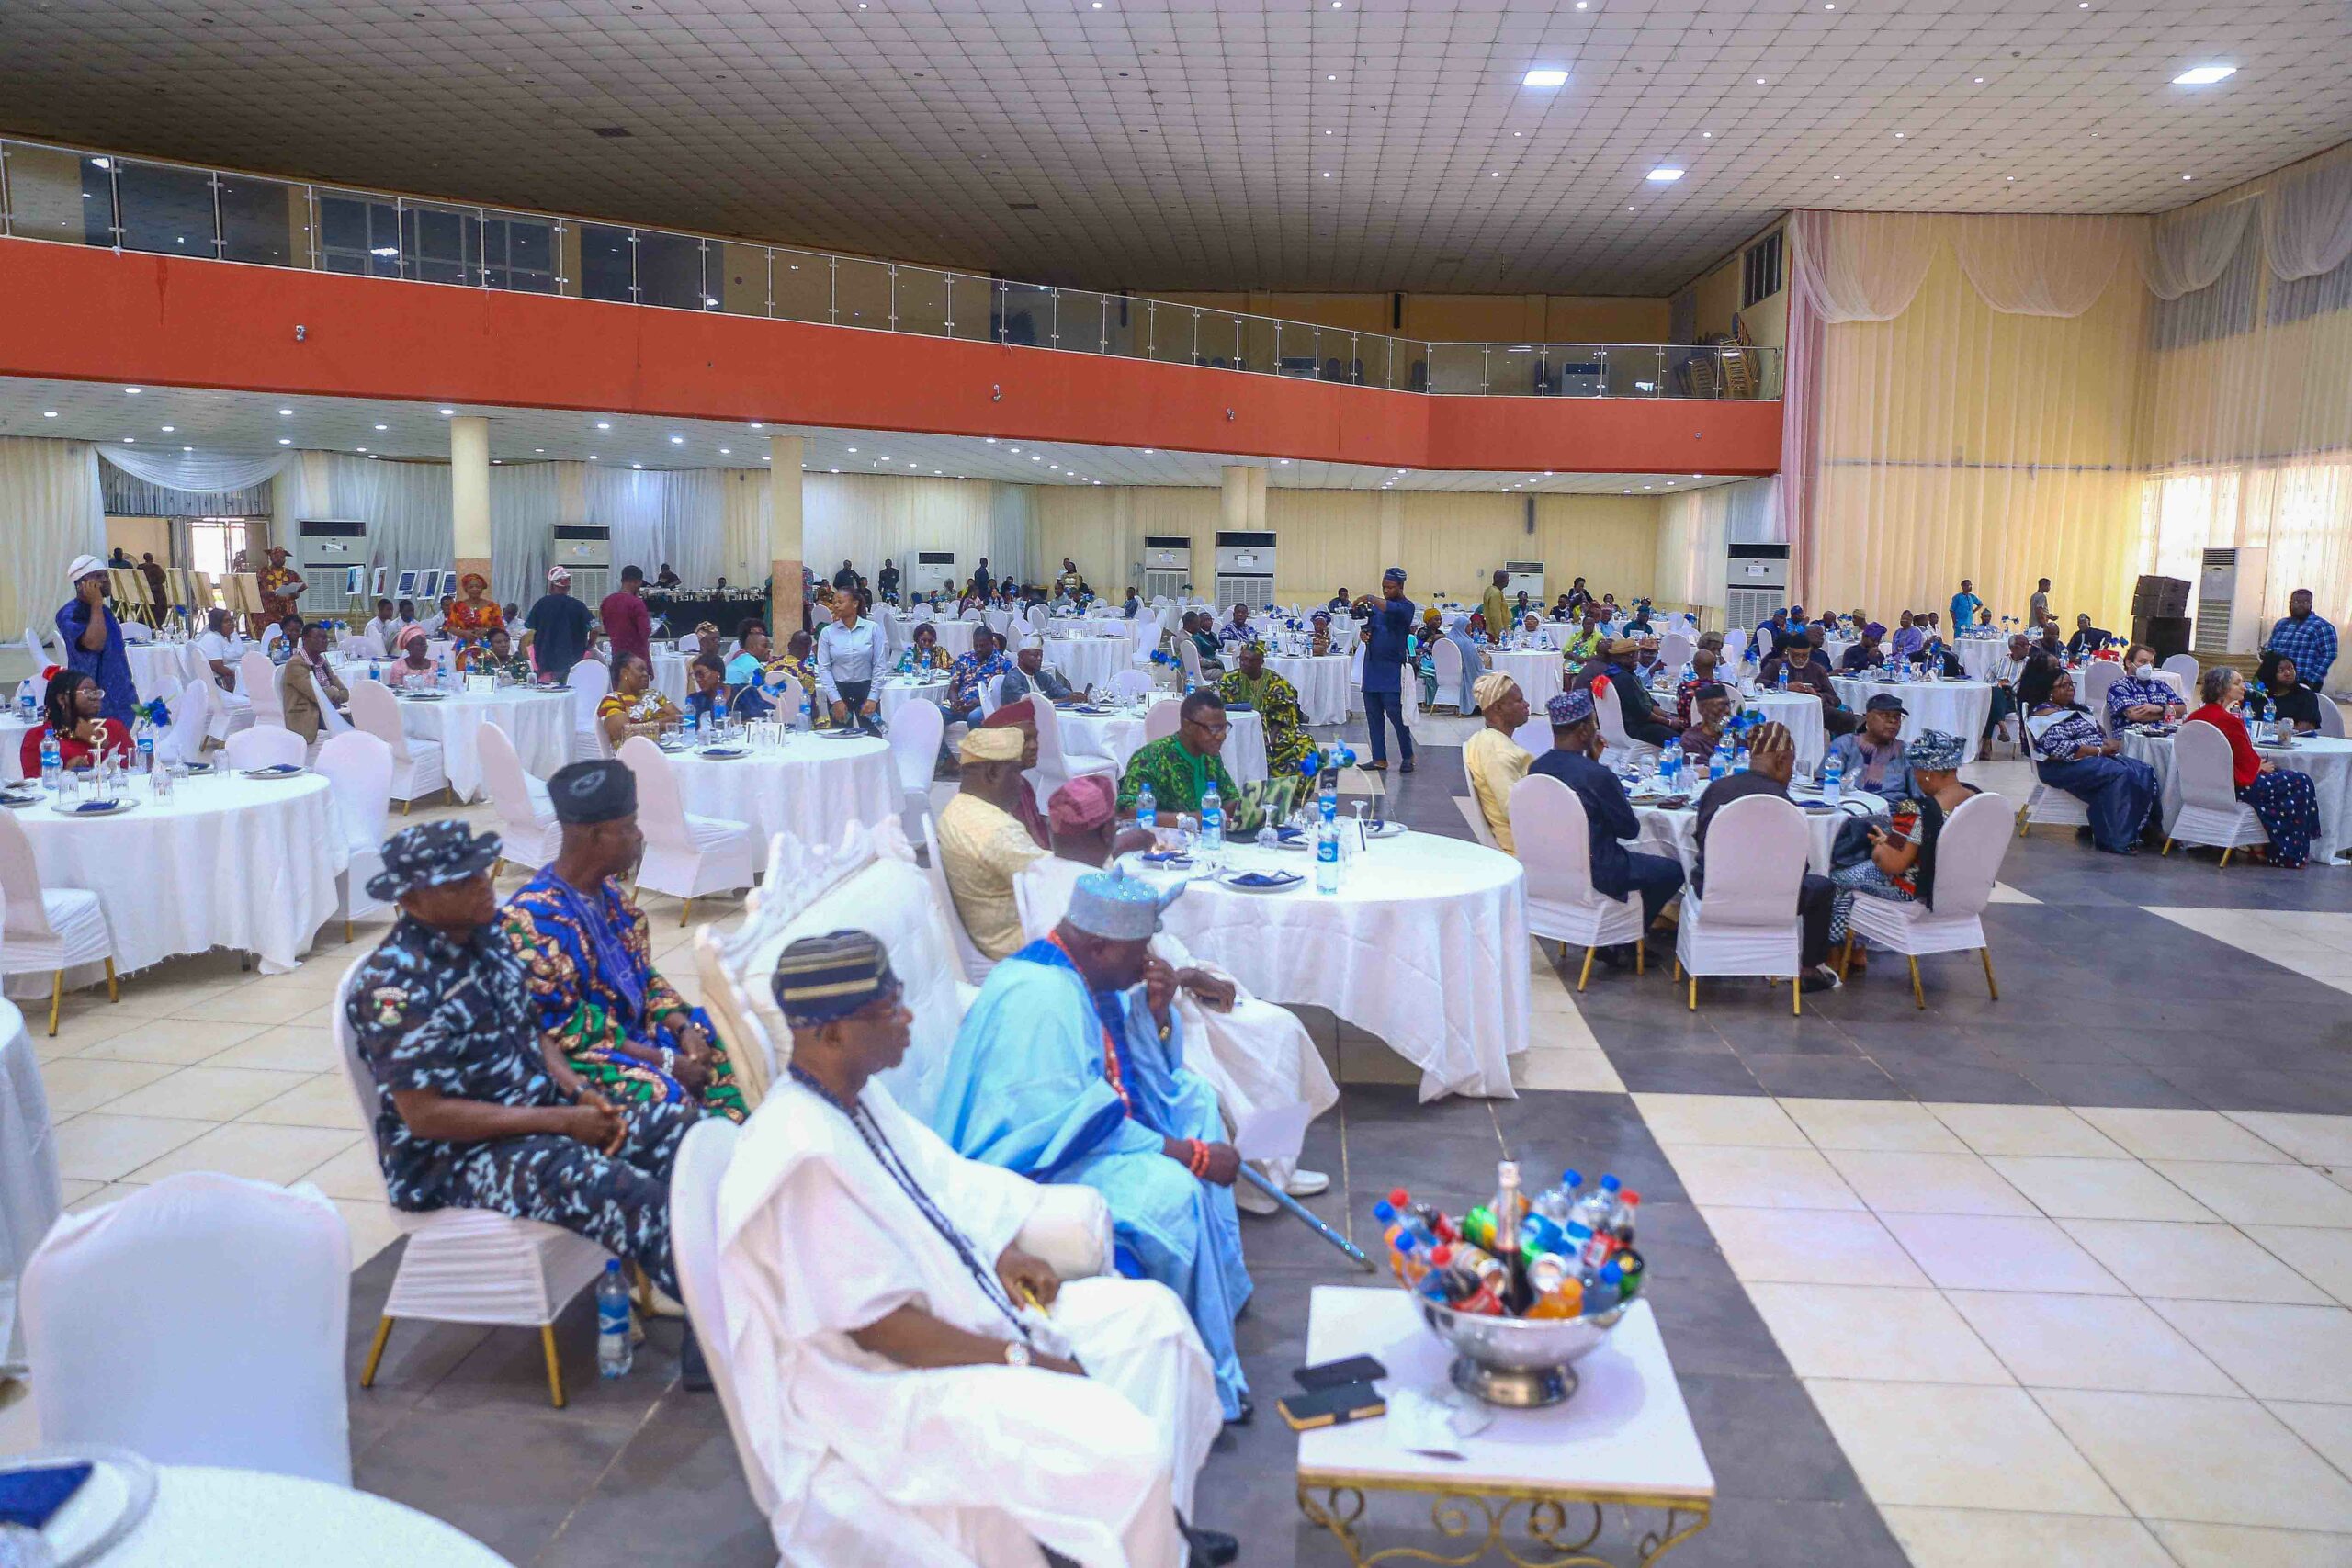 Cross section of guests at the event